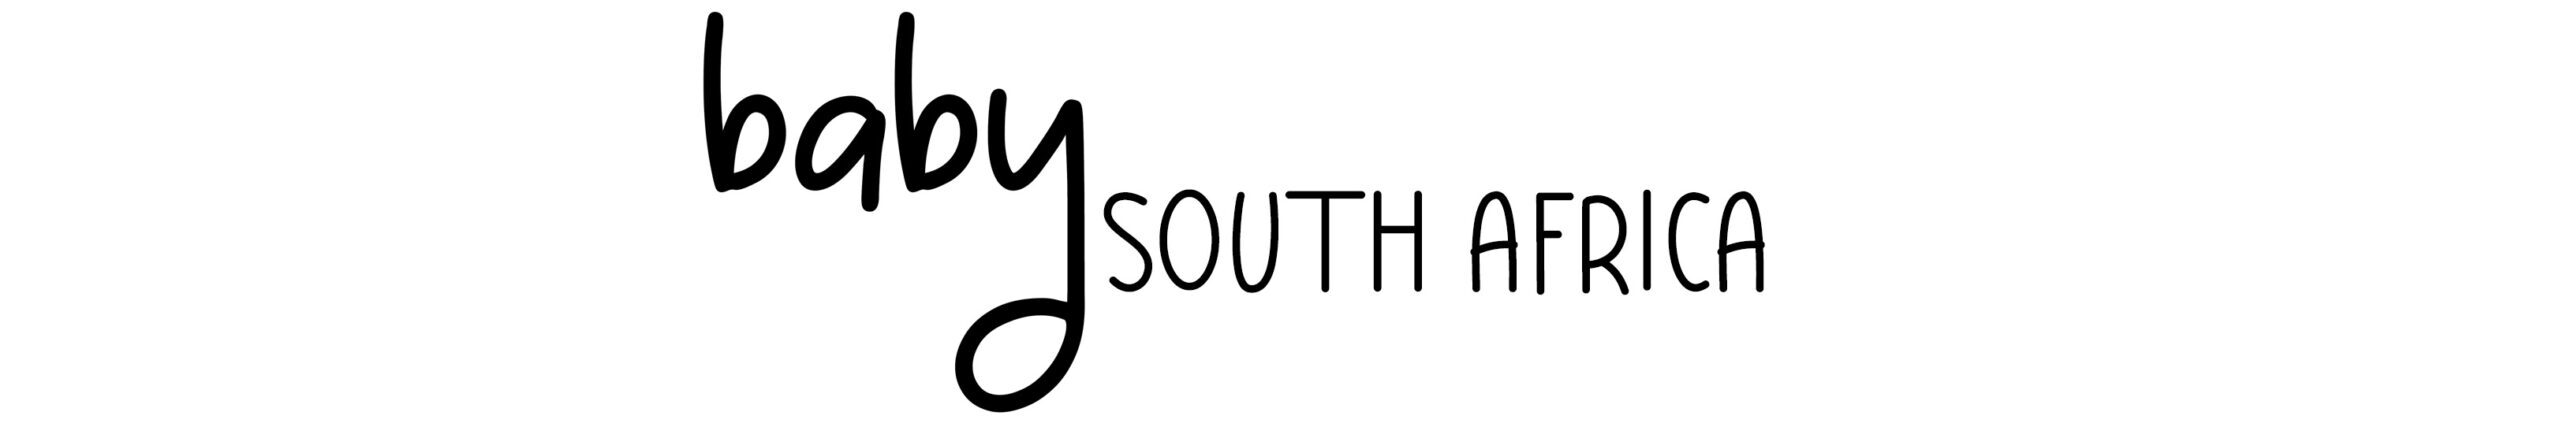 Baby South Africa